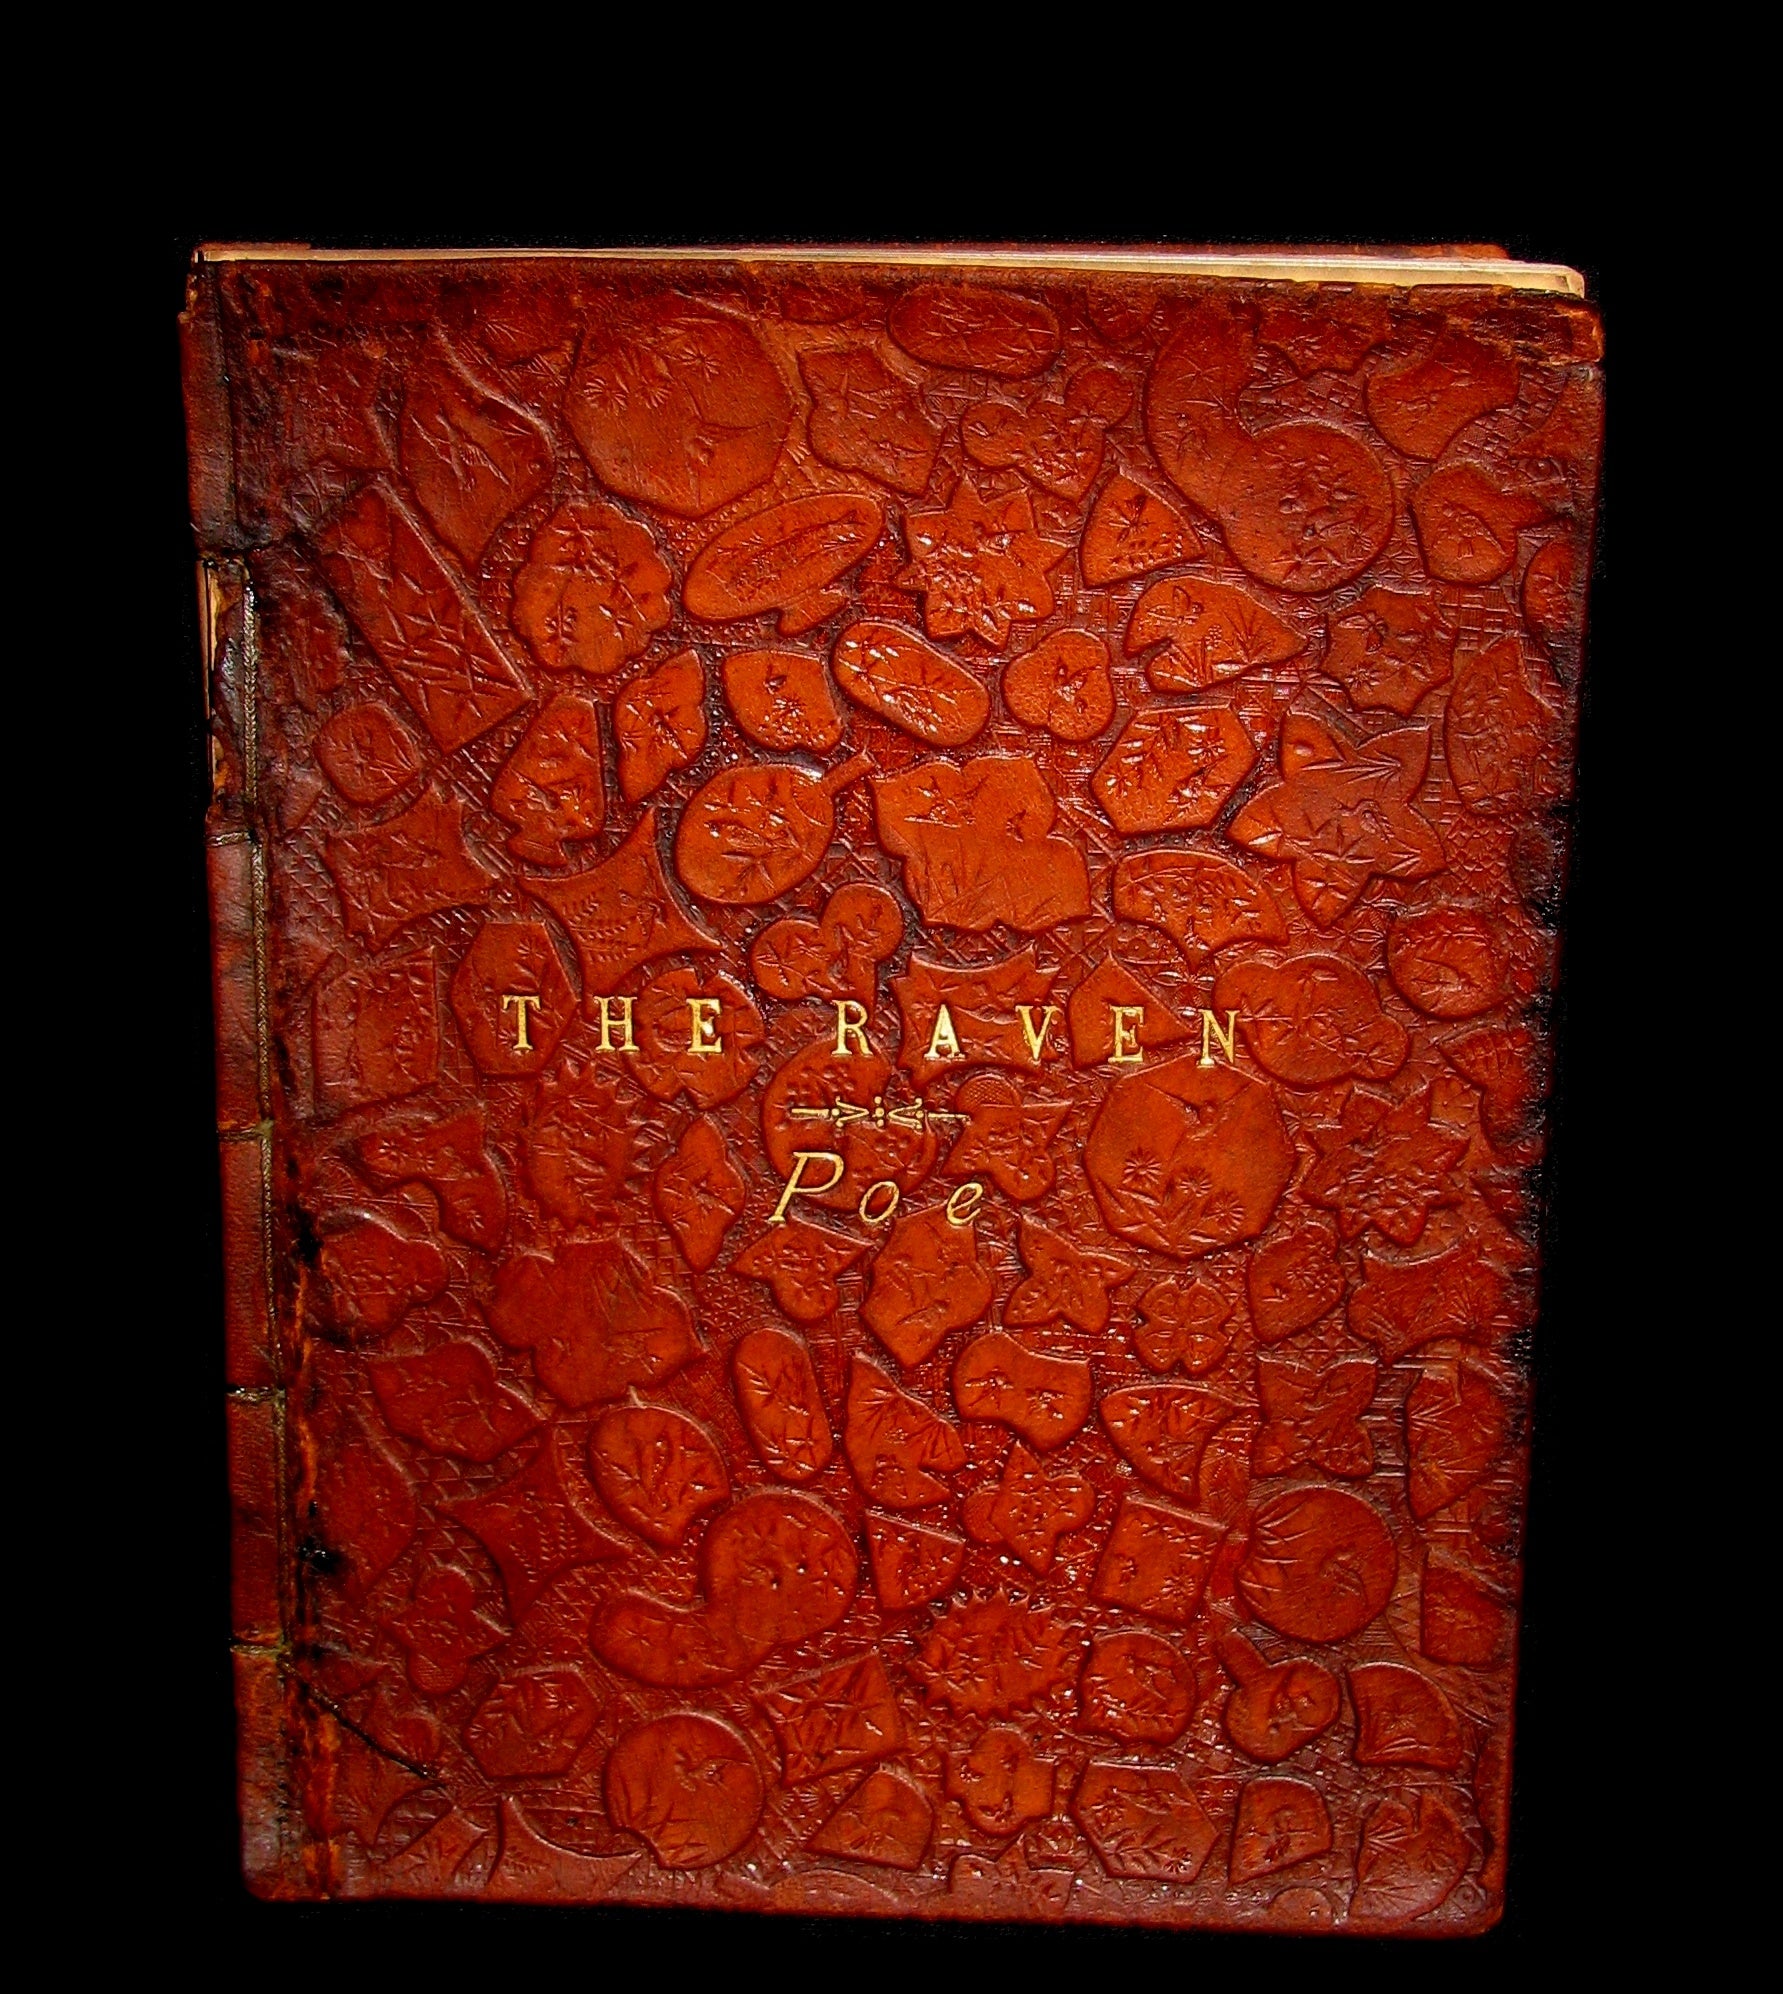 1887 Scarce Victorian Book - The RAVEN by Edgar Allan POE (Illustrated by W. L. Taylor)